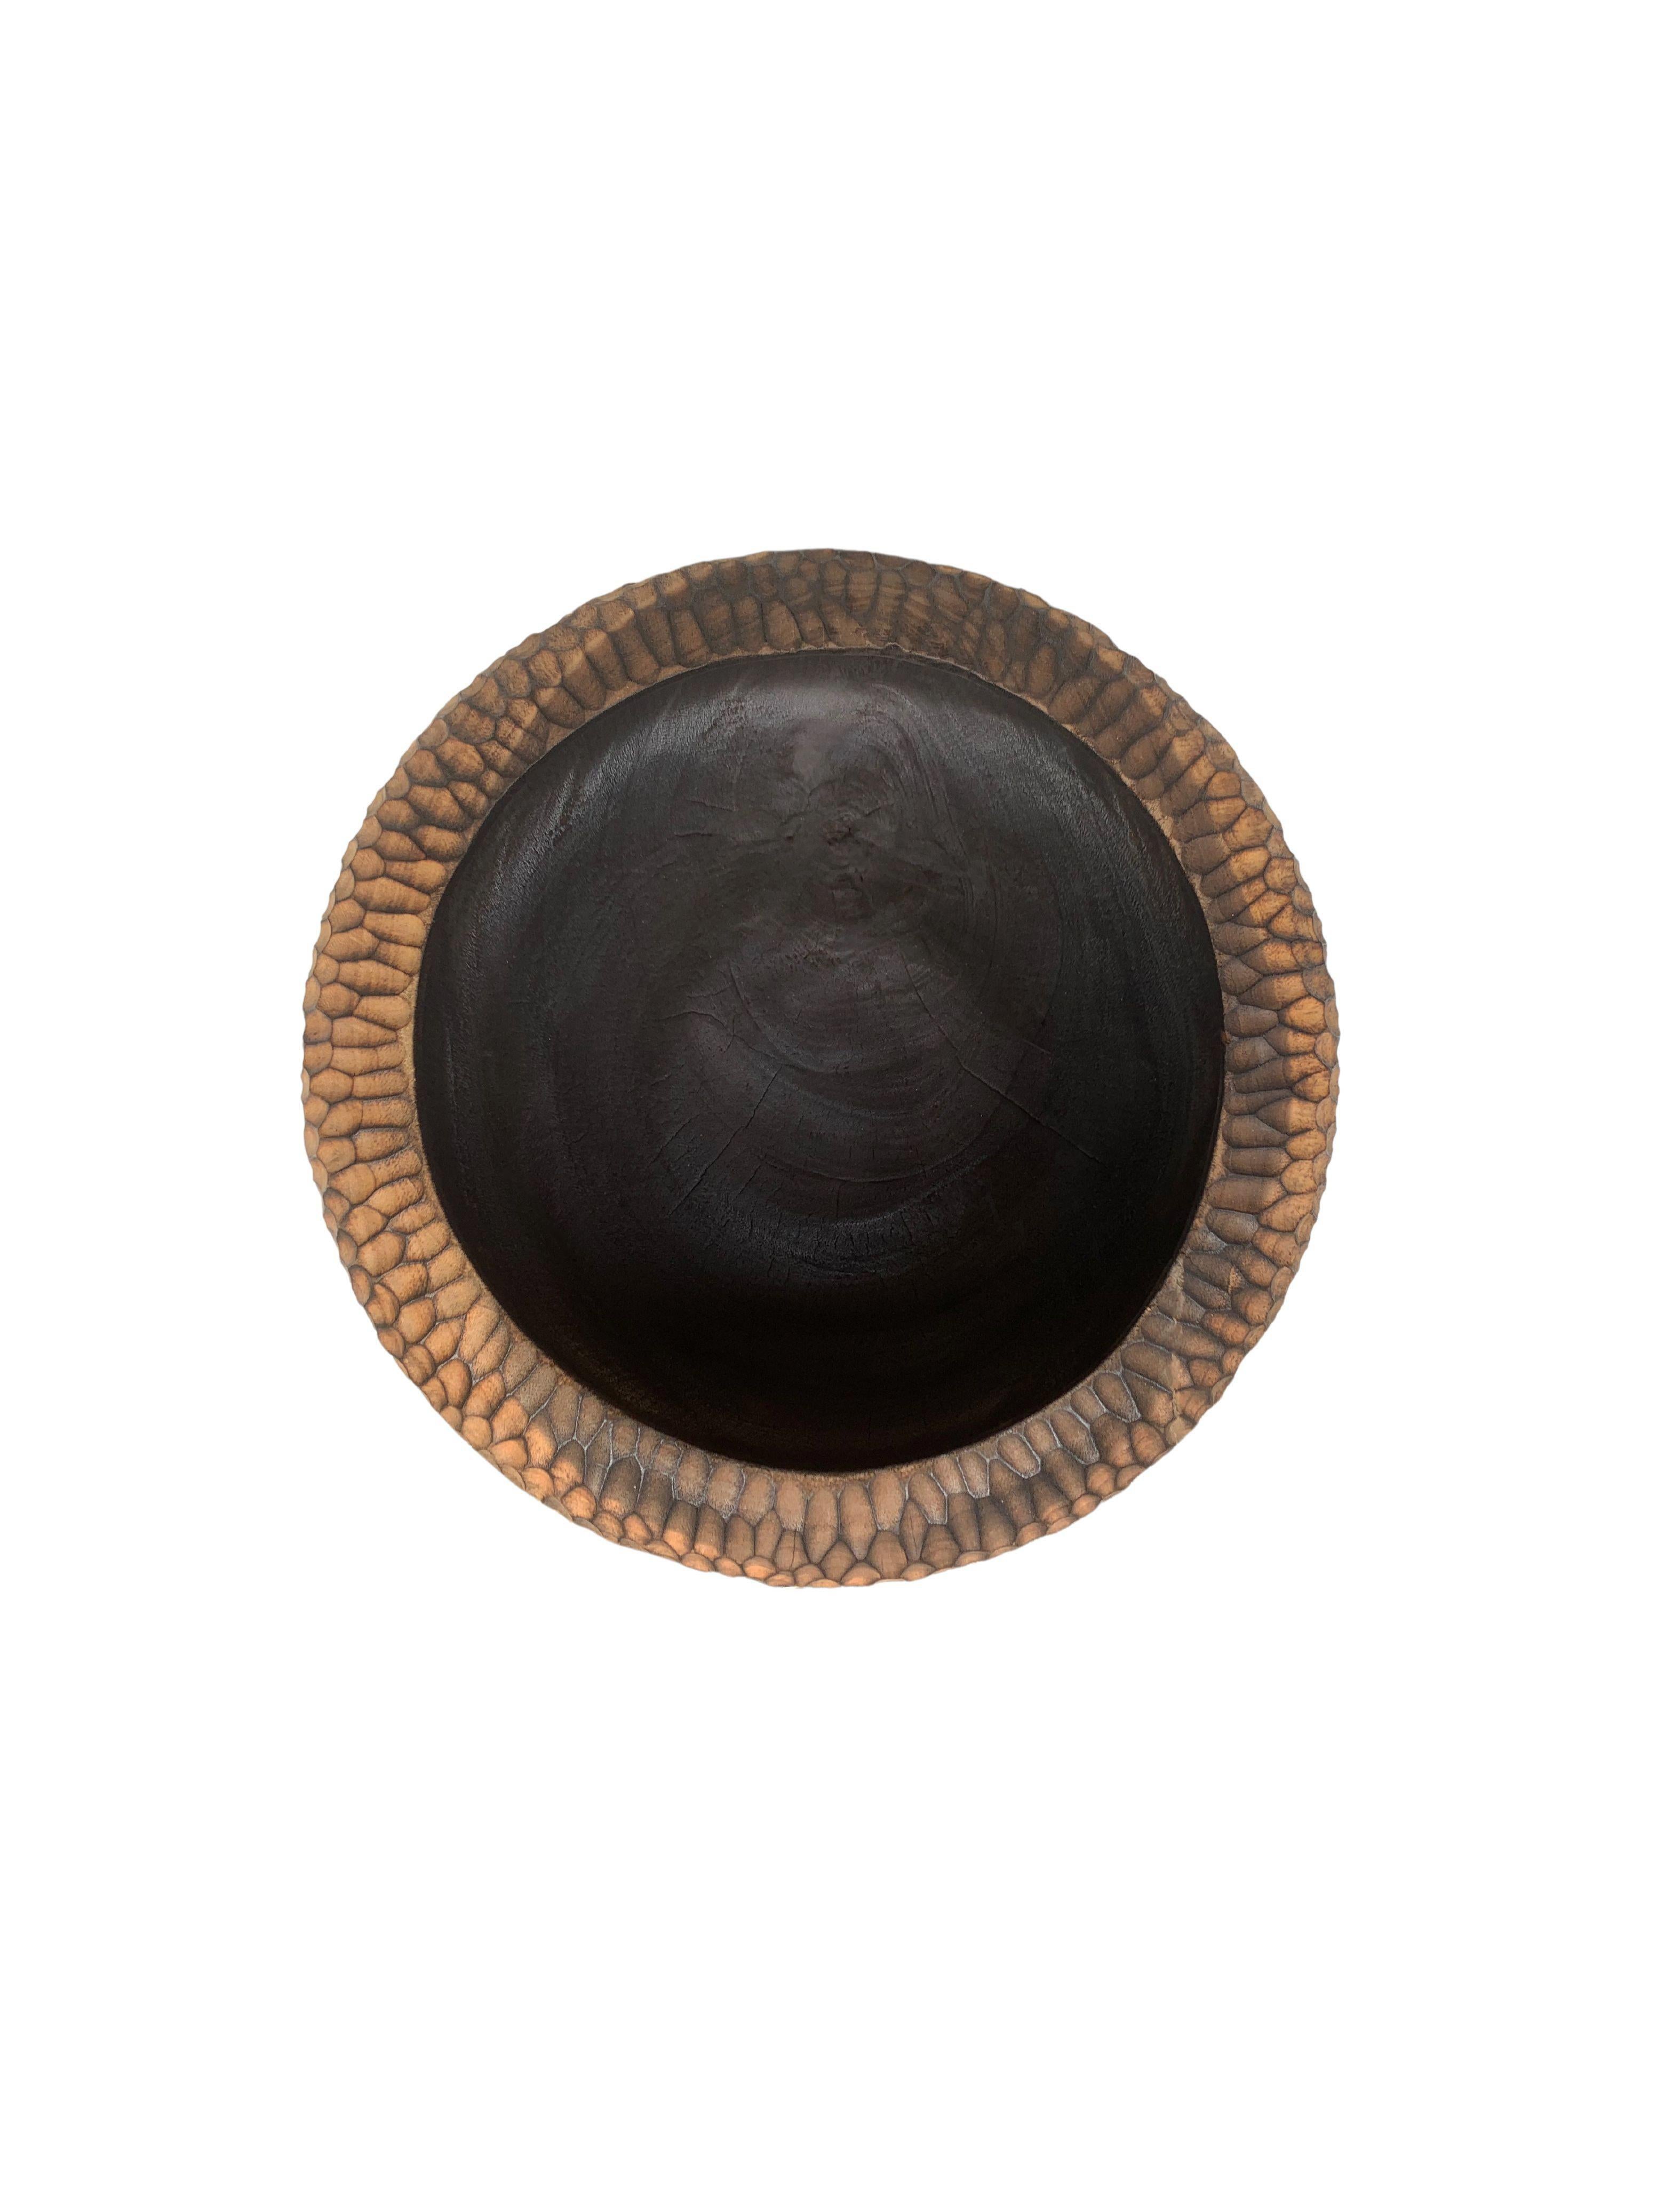 Carved Solid Mango Wood Bowl with Hand-Hewn Detailing and Burnt Detailing For Sale